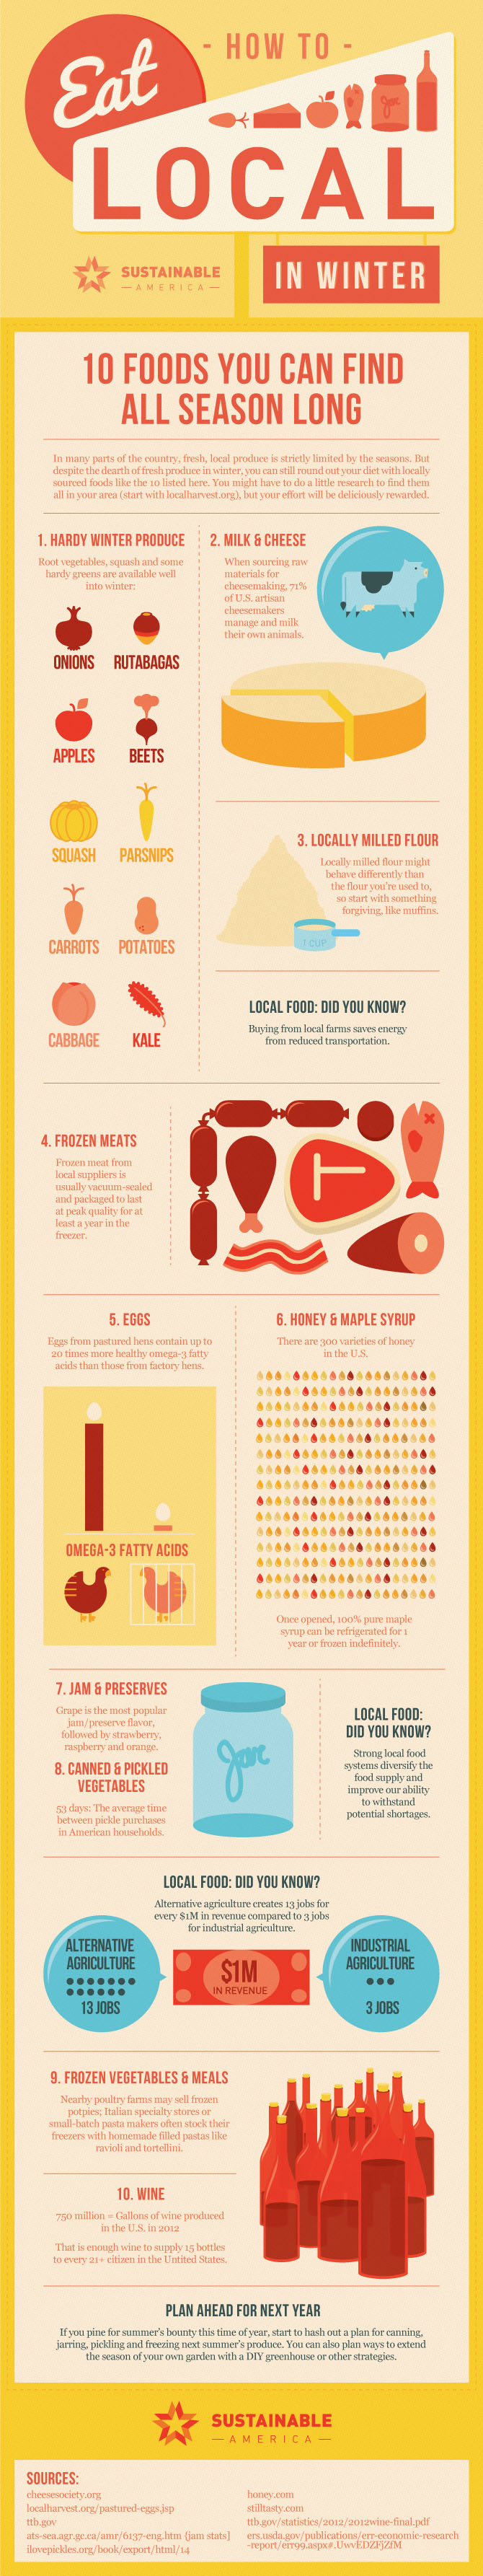 How to Eat Local in Winter infographic